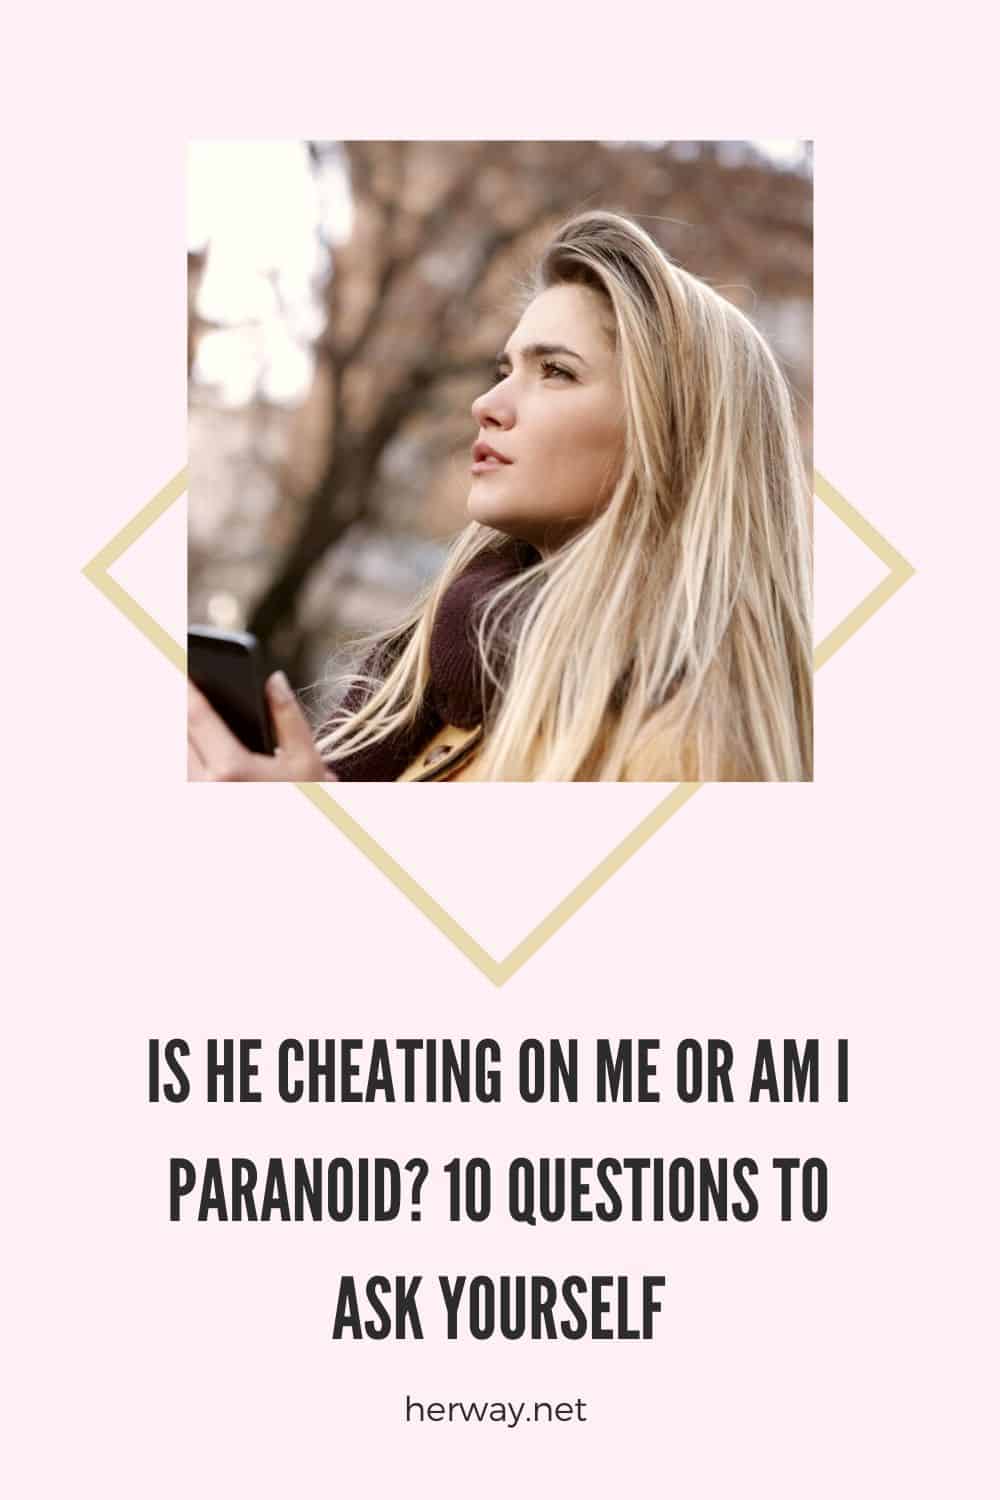 Is He Cheating On Me Or Am I Paranoid? 10 Questions To Ask Yourself